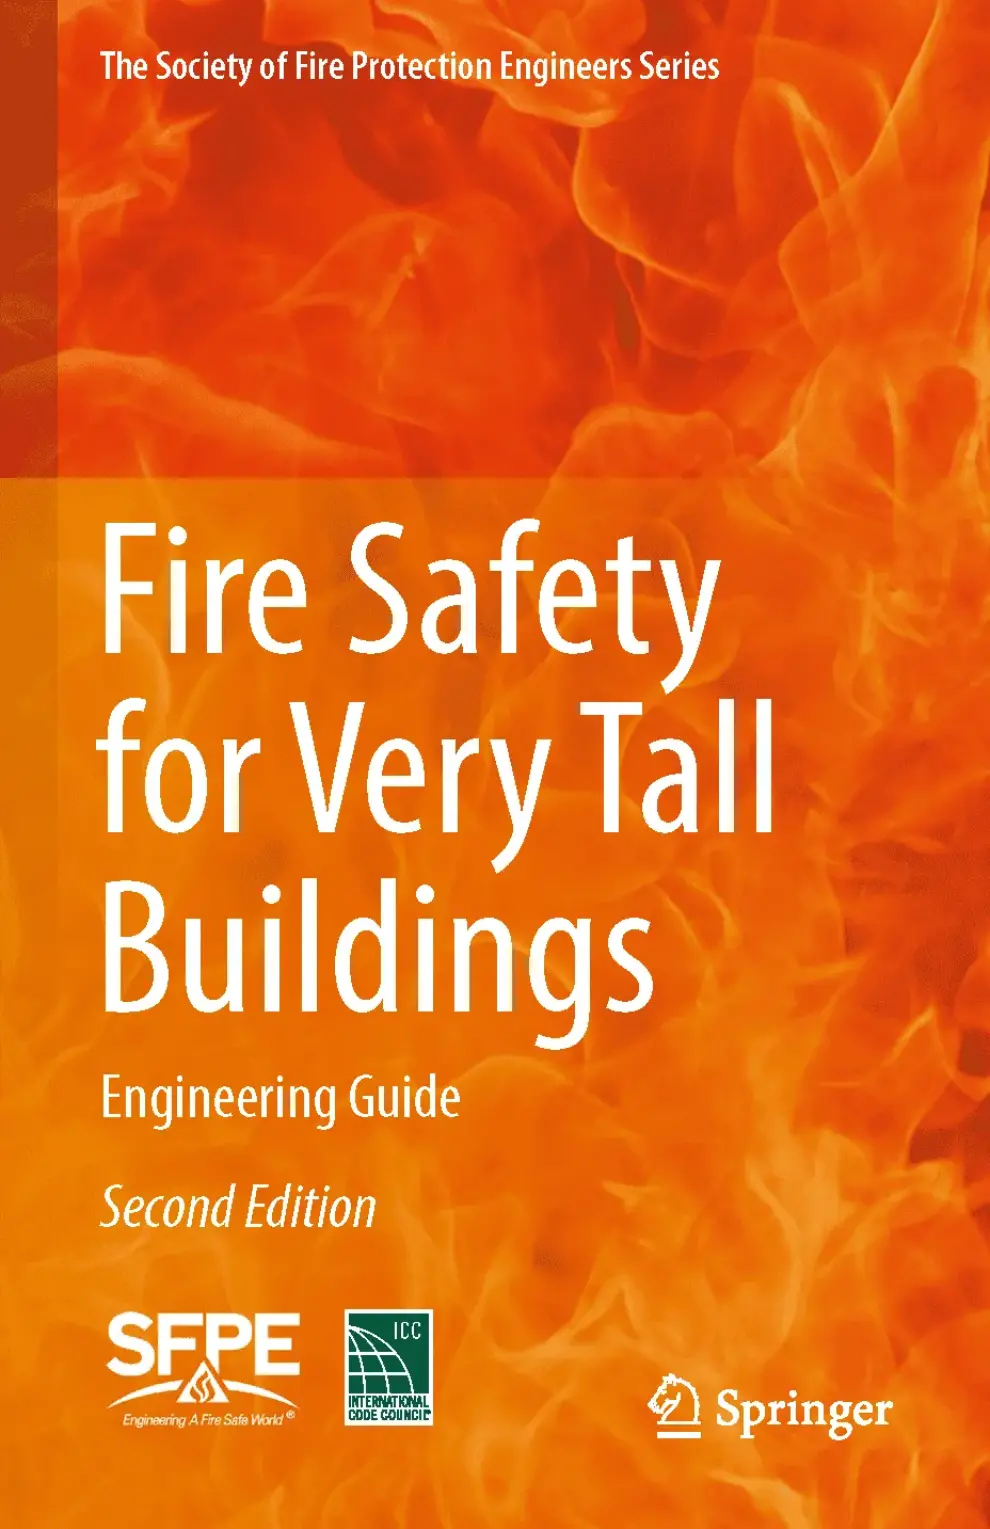 The Society of Fire Protection Engineers, the International Code Council, and Springer Publishing Announce New Engineering Guide on Fire Safety for Very Tall Buildings